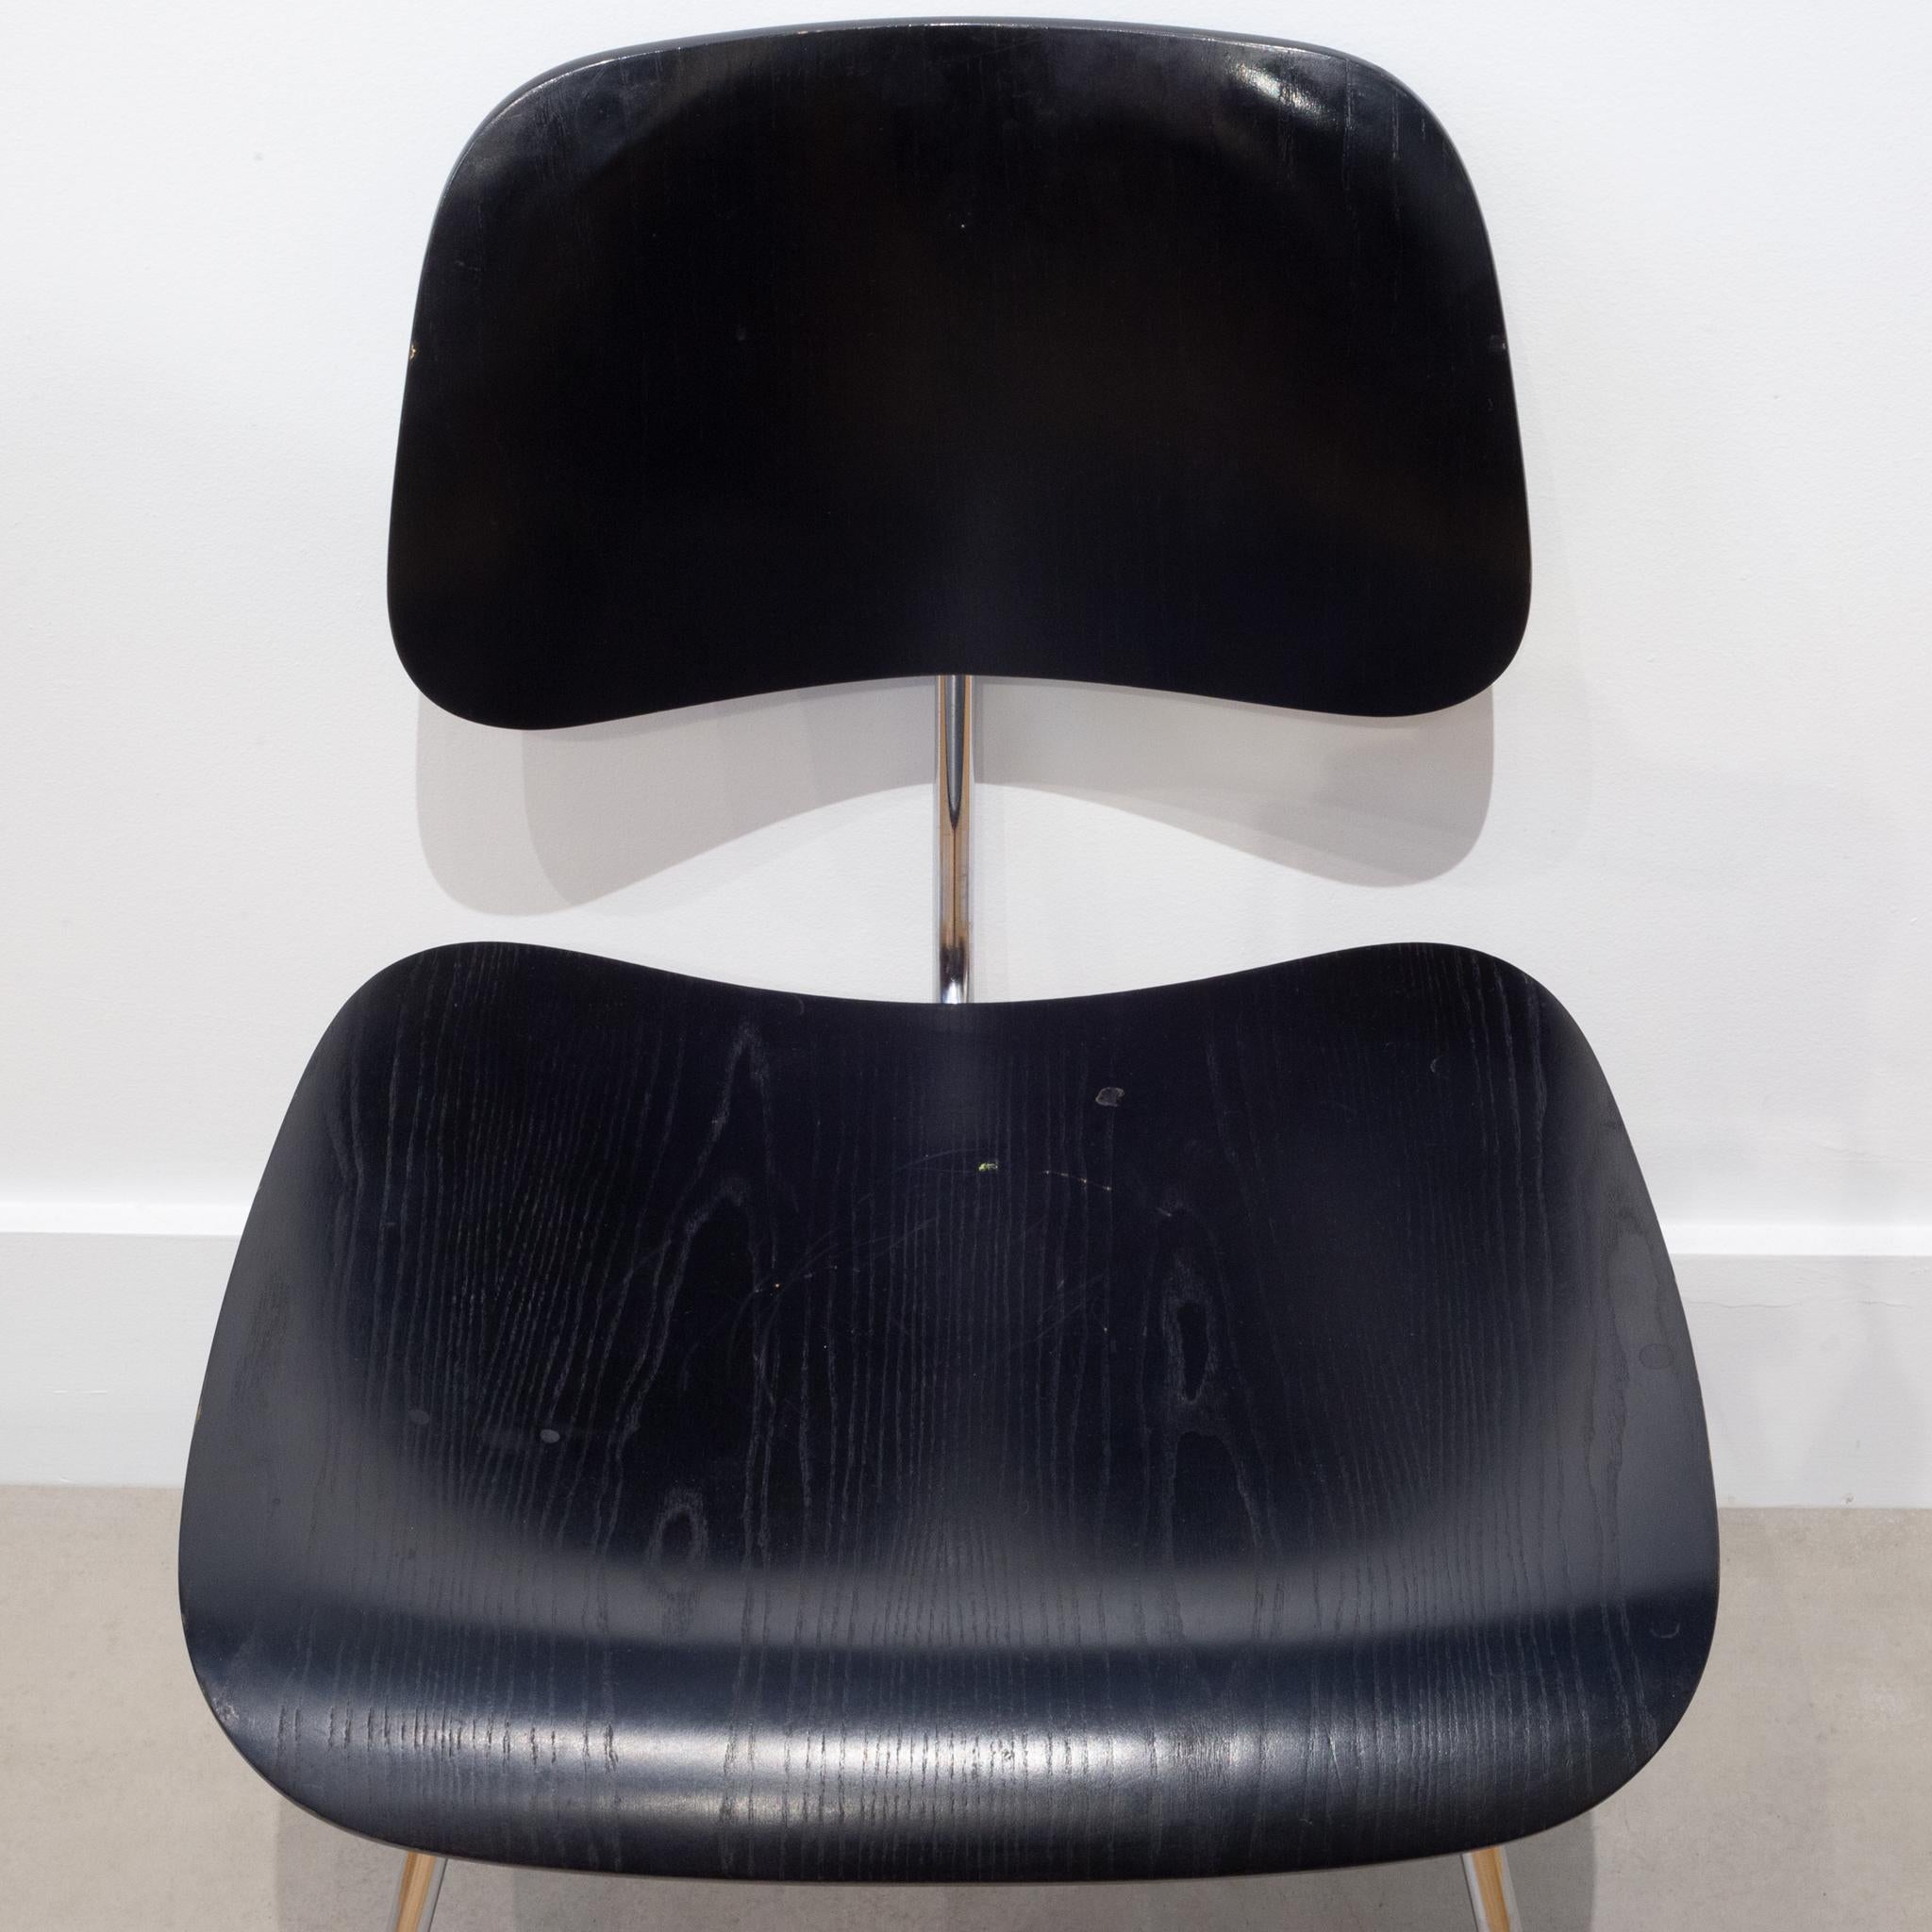 Eames for Herman Miller DCM Chairs in Black-Price is Per Chair 11